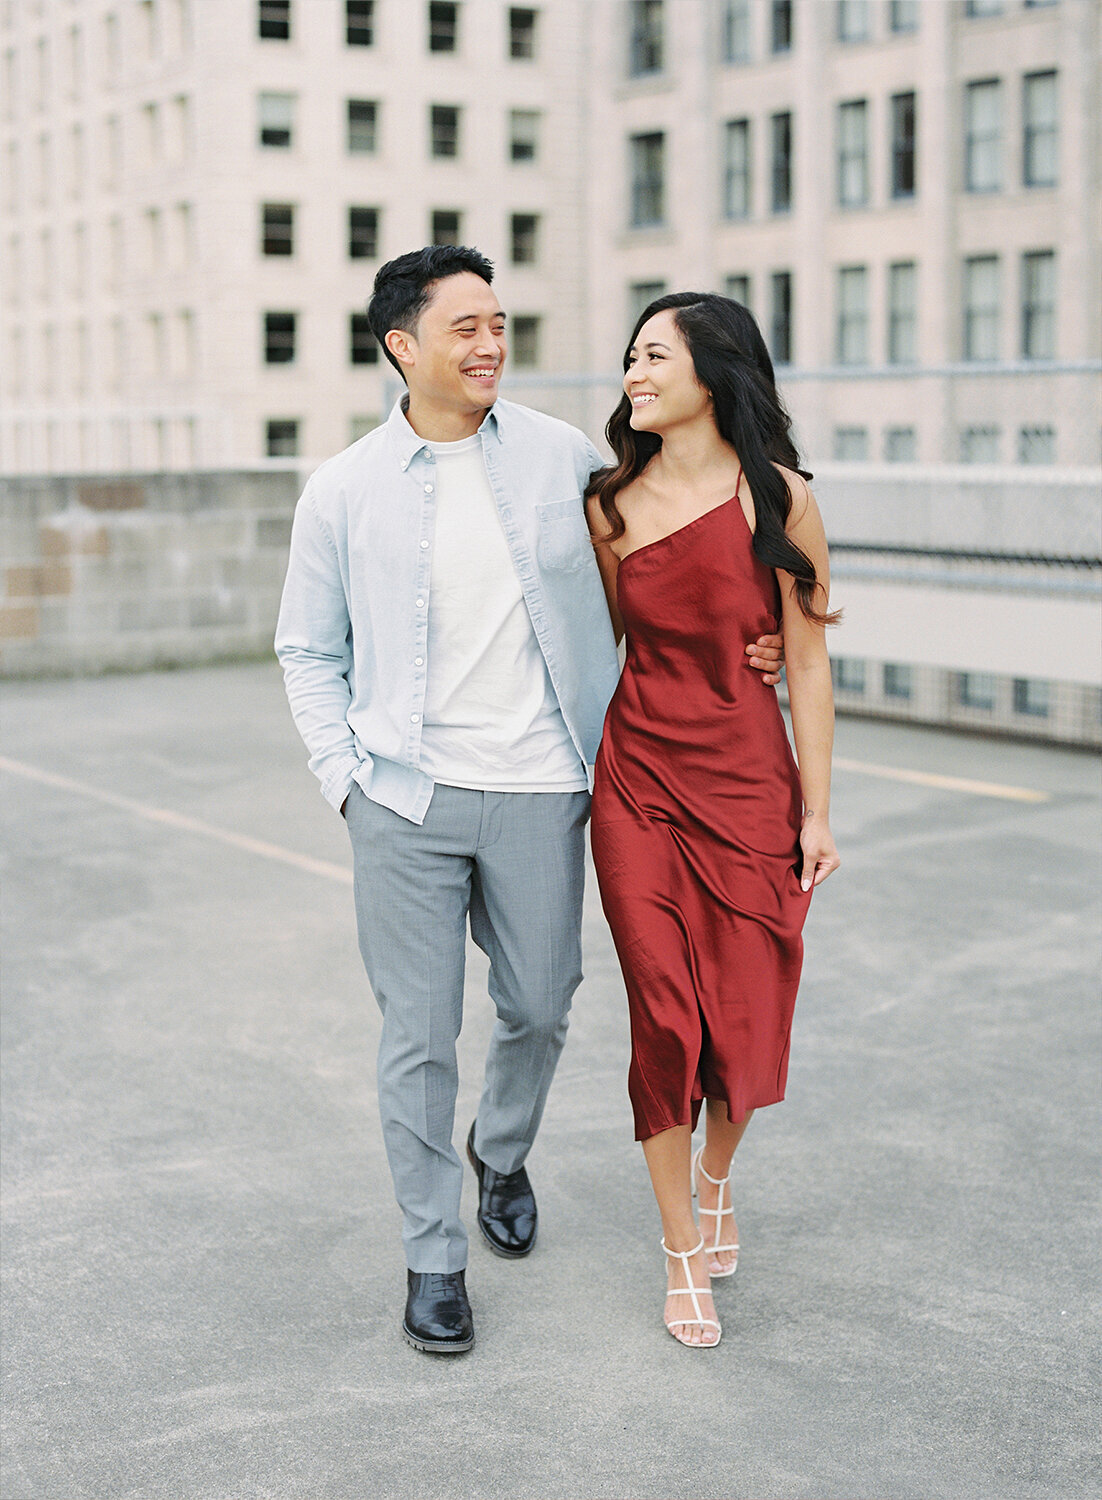 Seattle City Engagement Session on Film - Tetiana Photography - D&AJ - 4